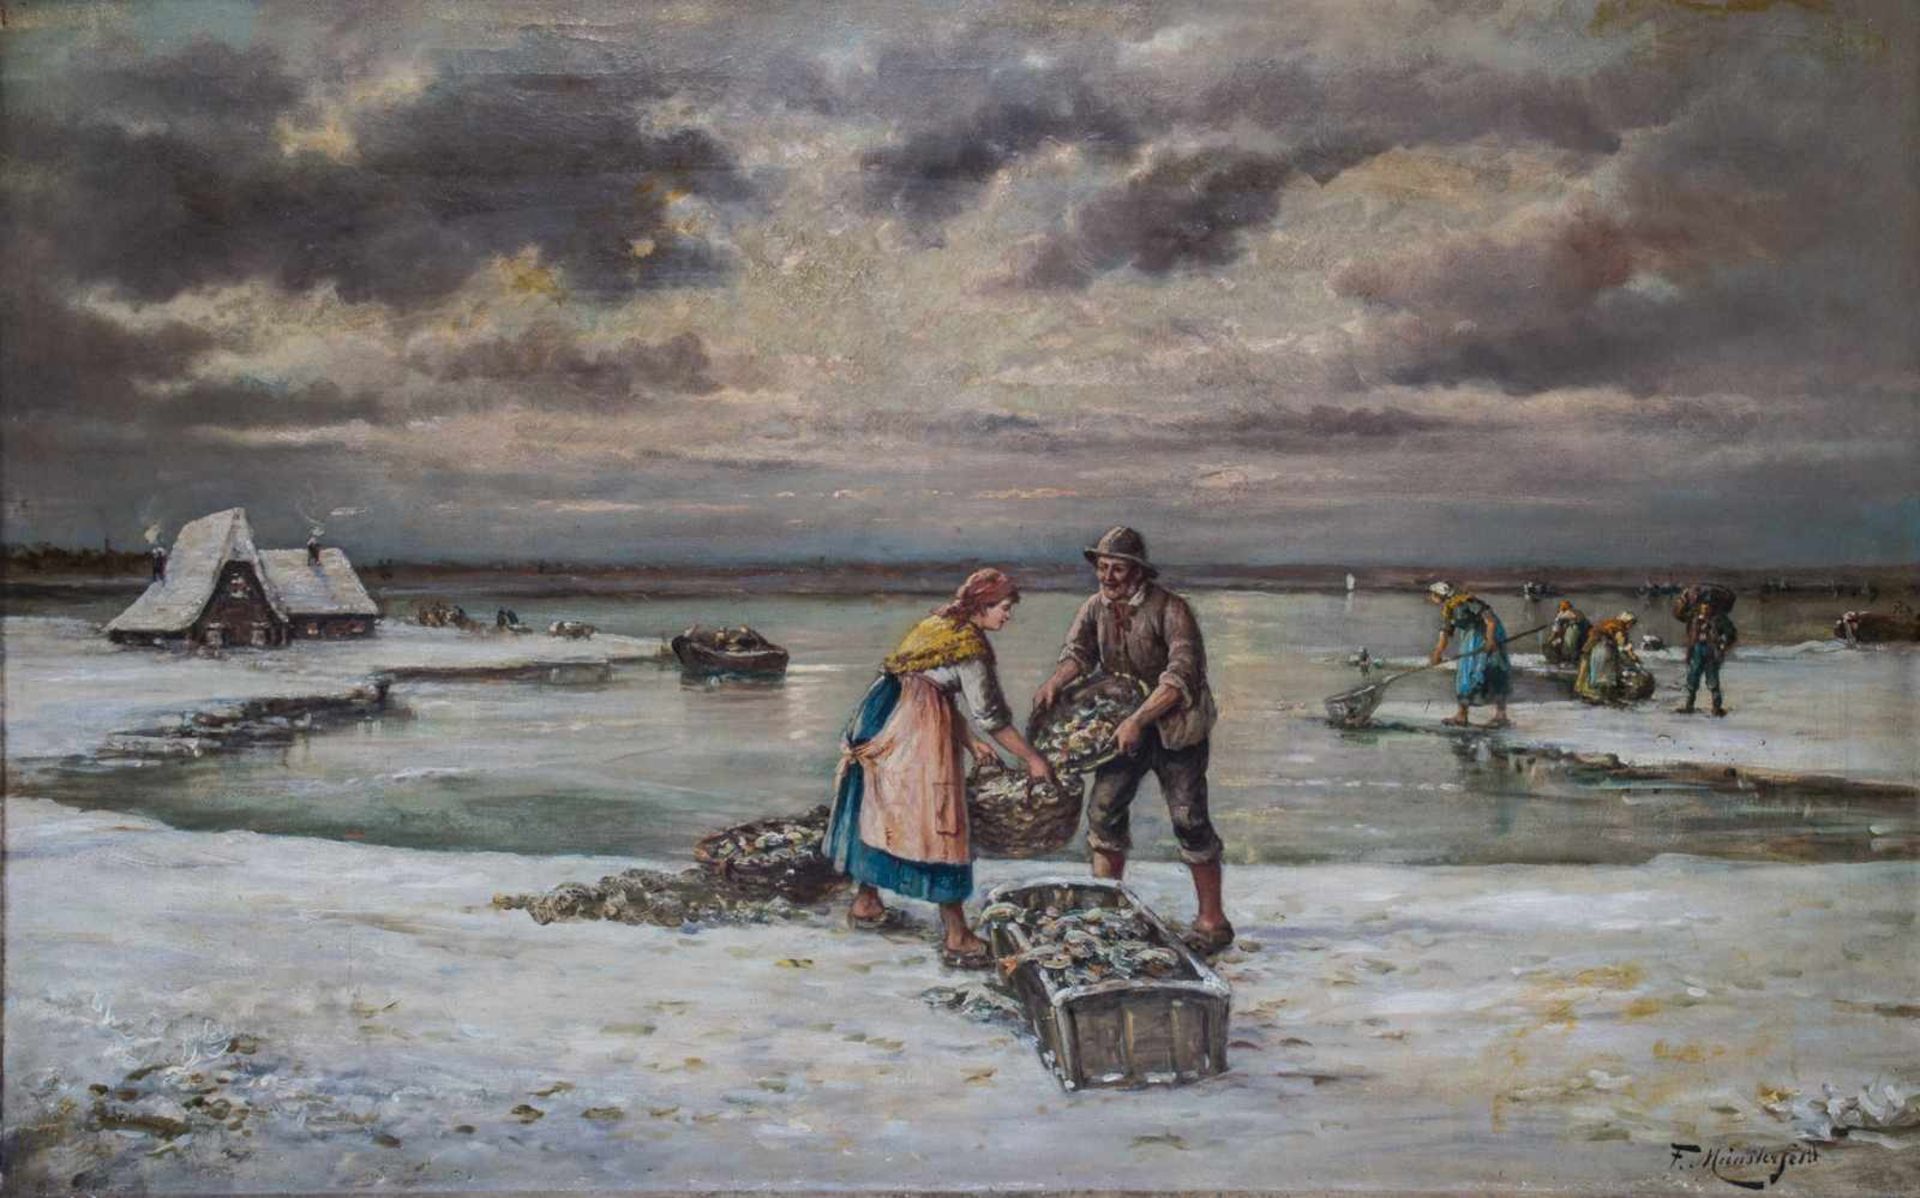 Winter coastline with ice fishing. Oil on canvas, minor wear. Signed lower right. Framed.130 x 82